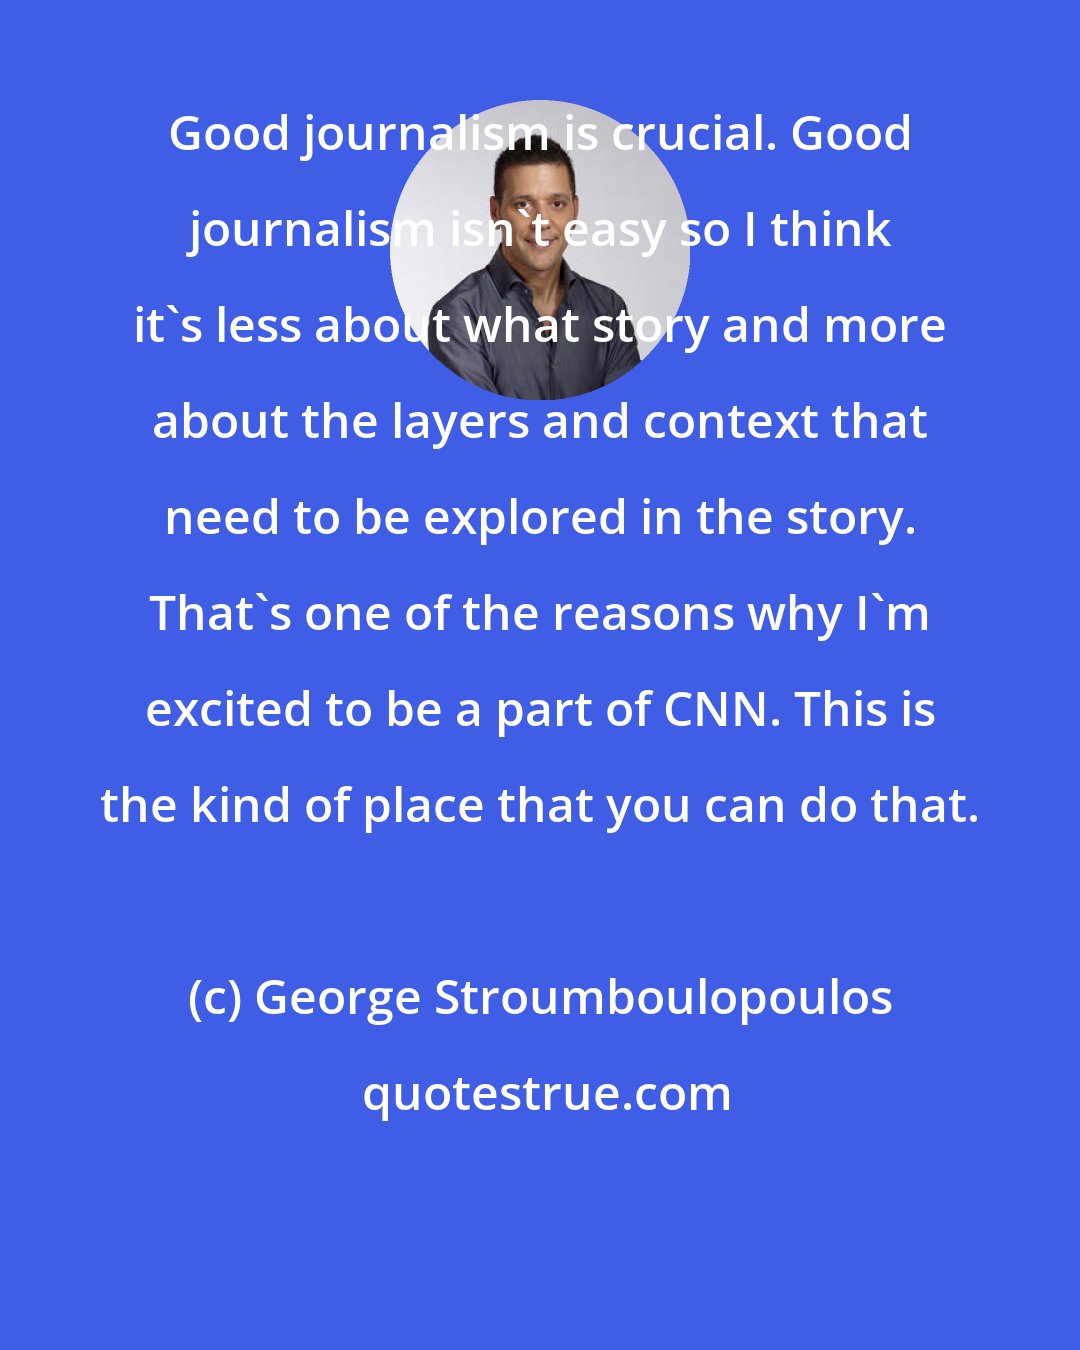 George Stroumboulopoulos: Good journalism is crucial. Good journalism isn't easy so I think it's less about what story and more about the layers and context that need to be explored in the story. That's one of the reasons why I'm excited to be a part of CNN. This is the kind of place that you can do that.